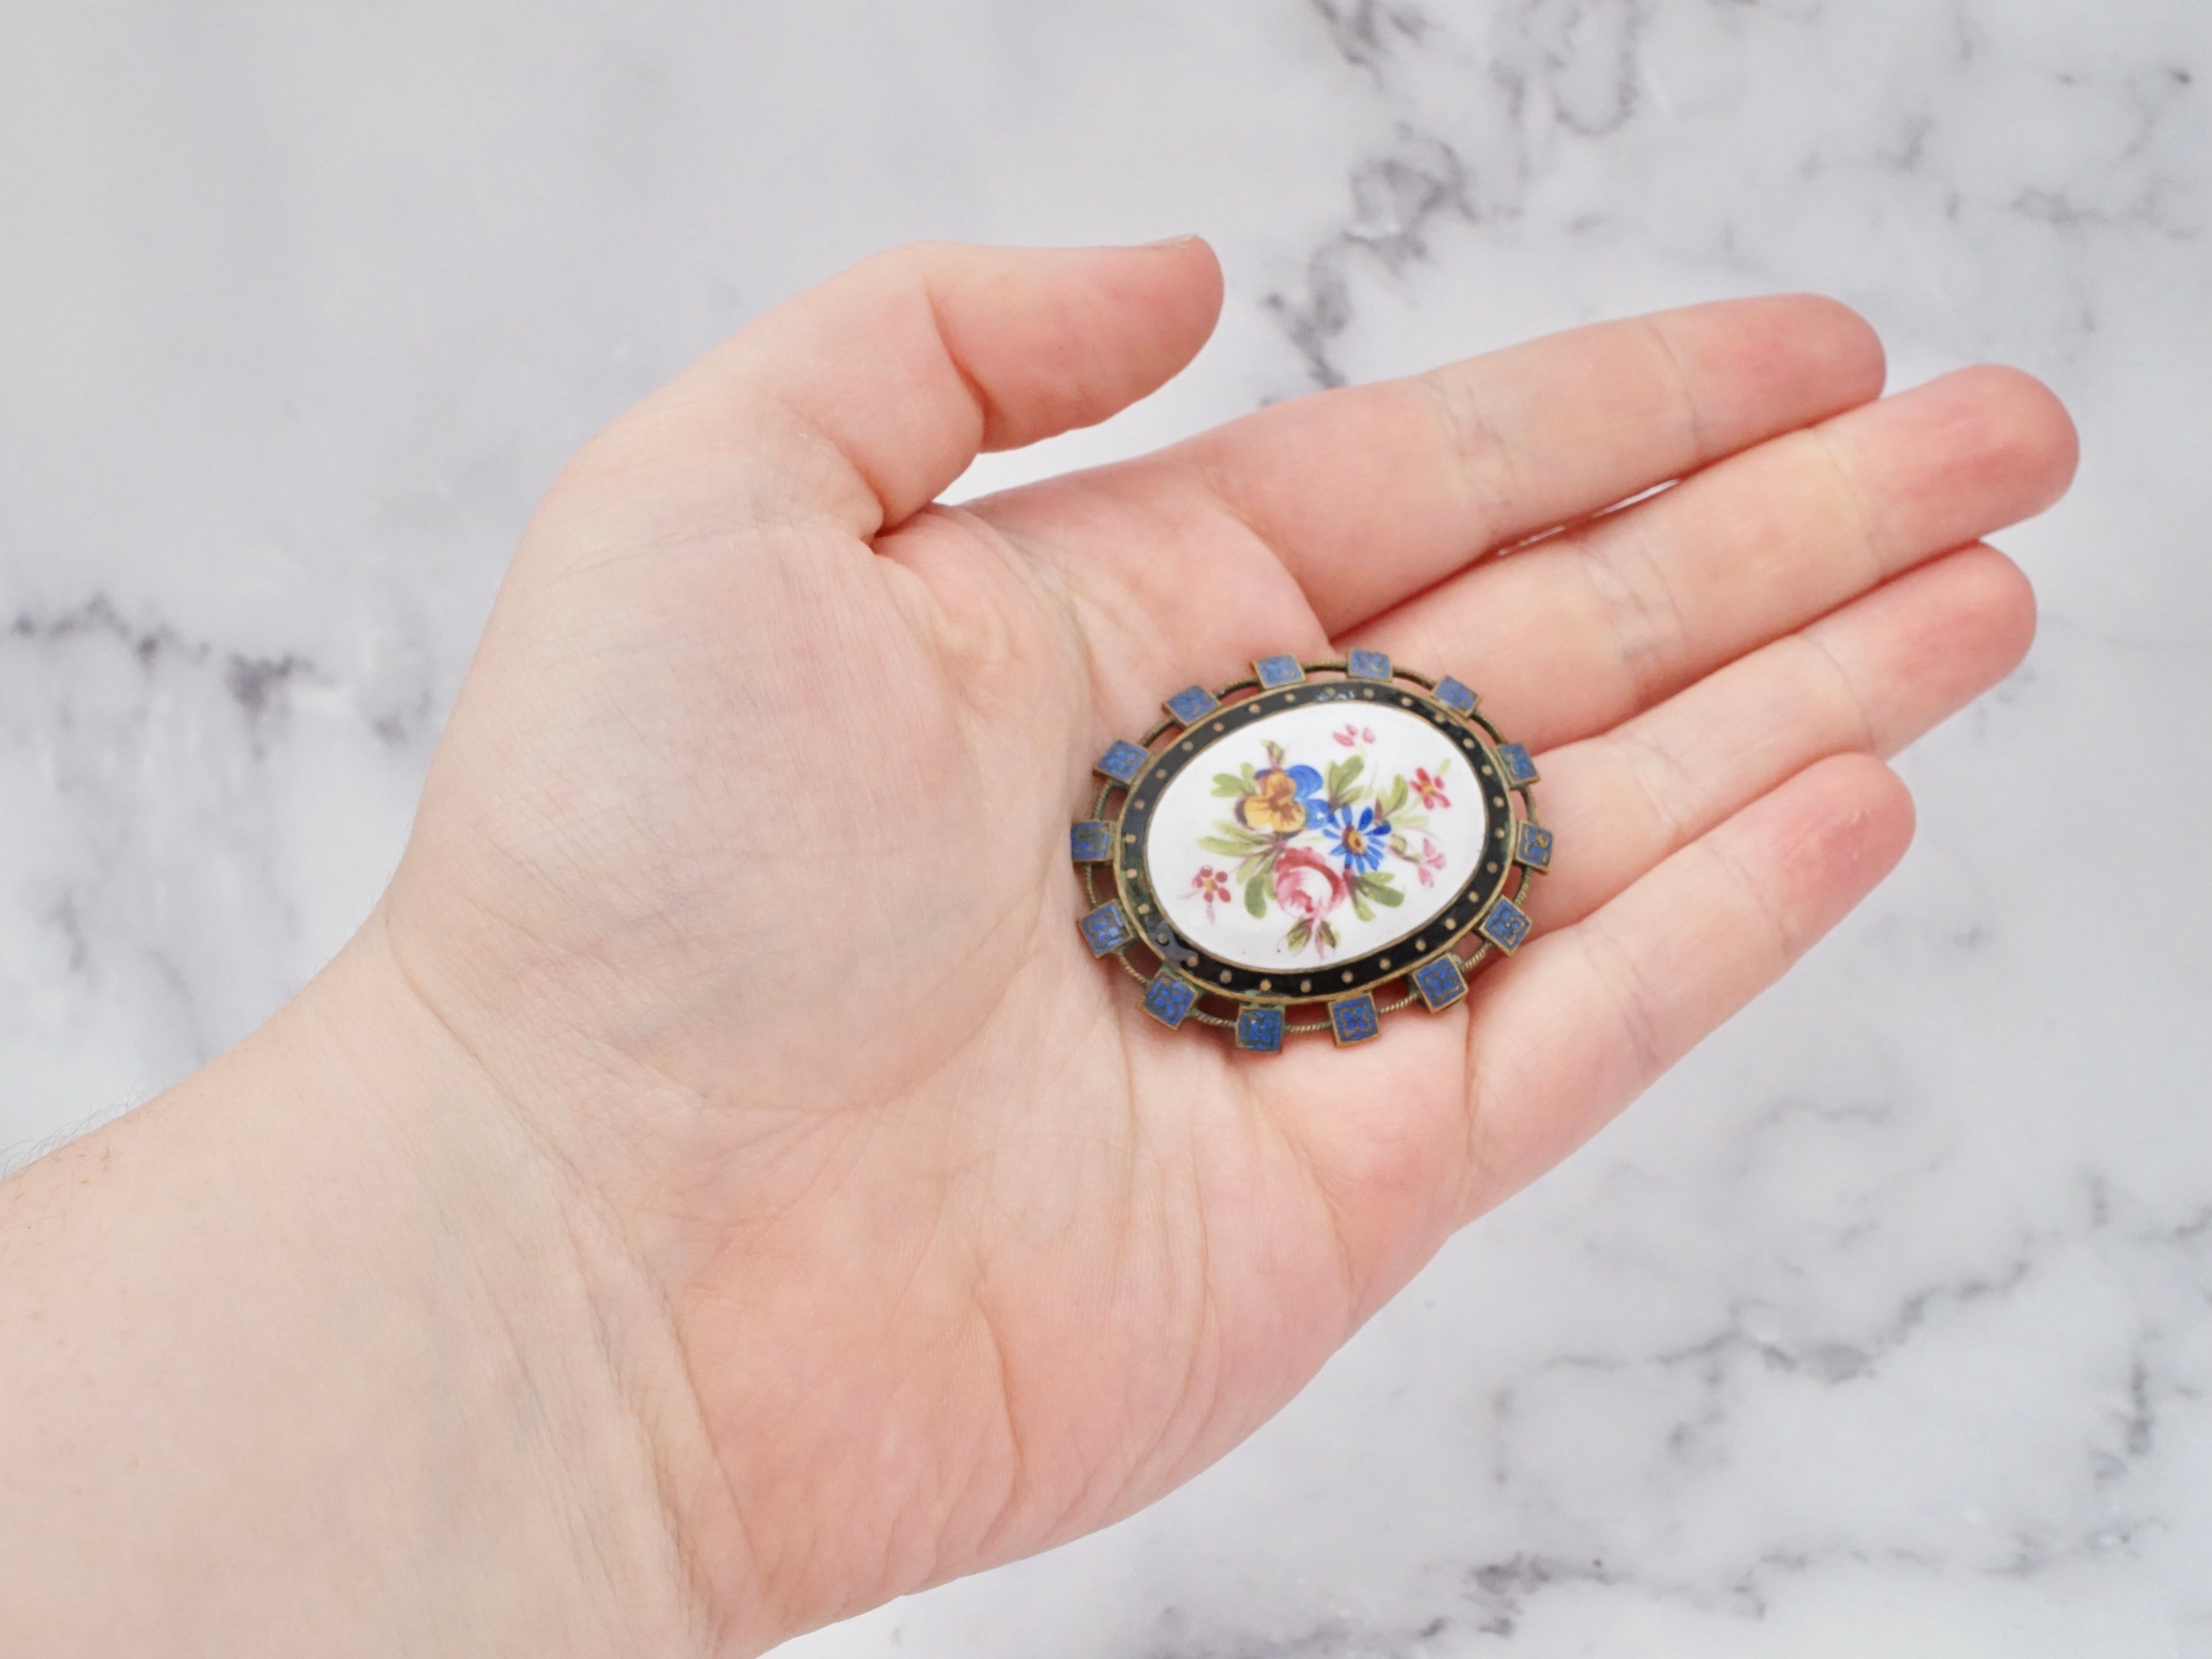 Antique Victorian hand-painted enamel and gilt metal brooch